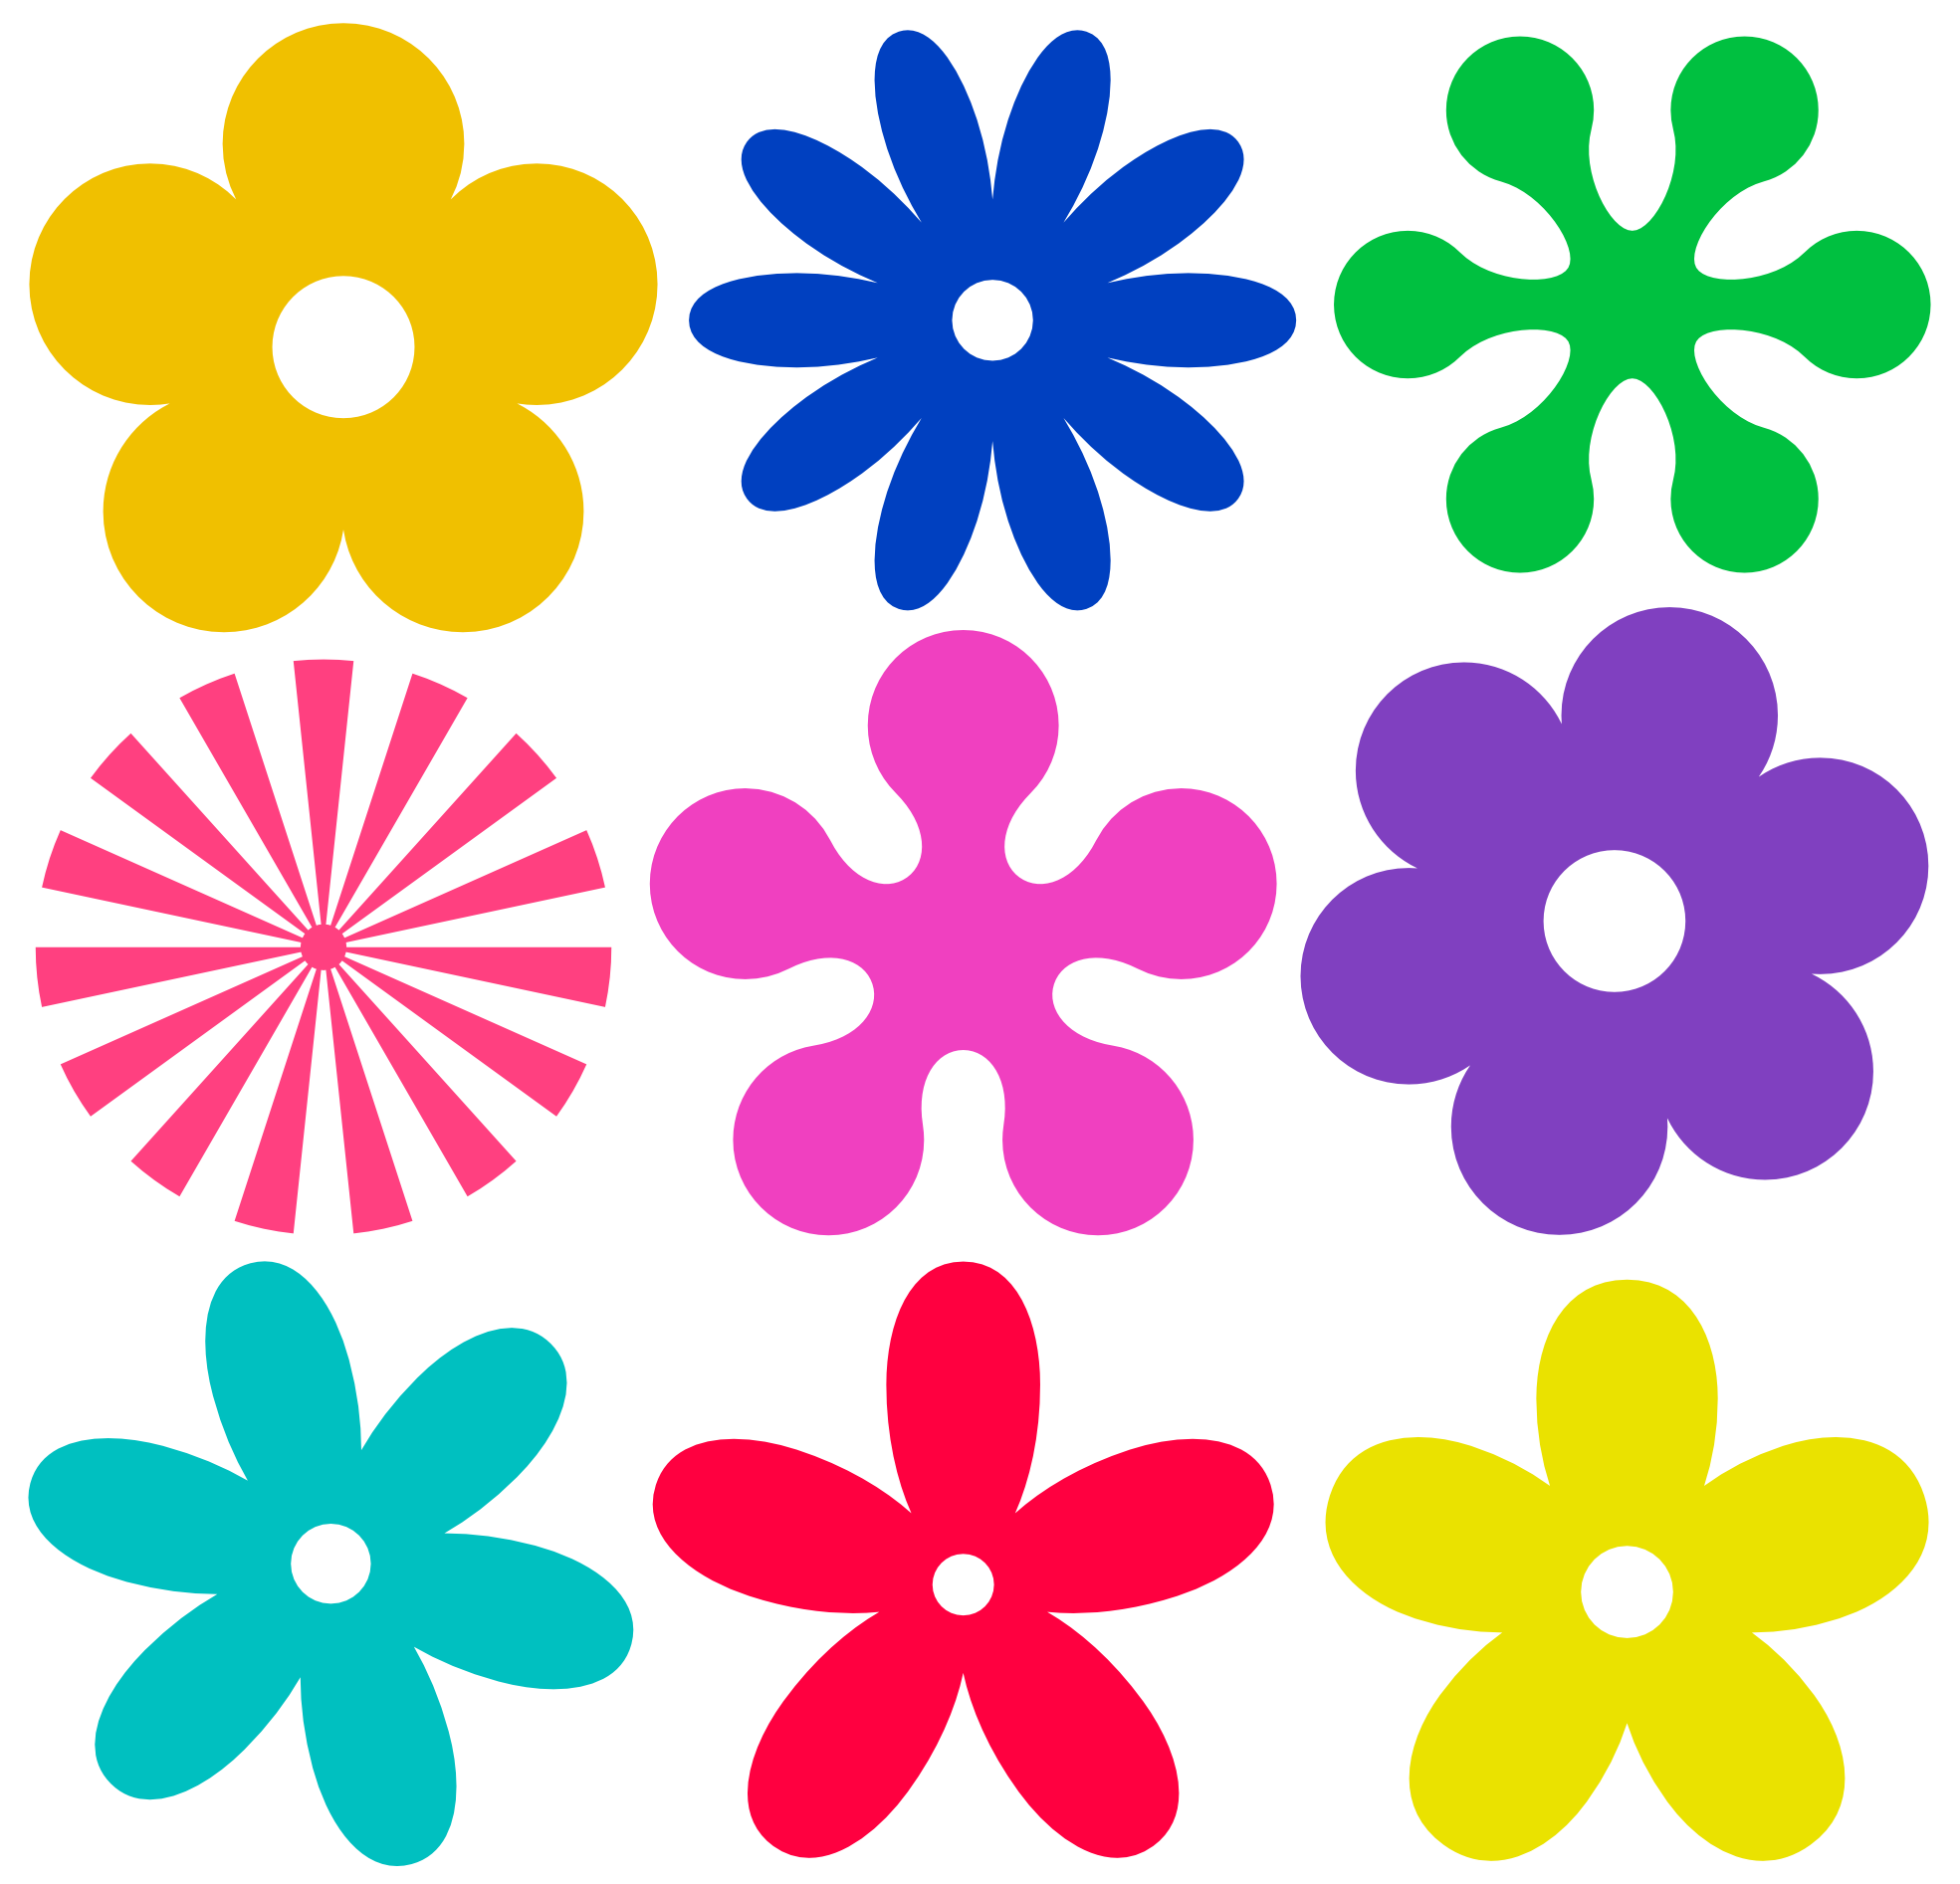 Hippie Daisies And Flowers Clipart - ClipArt Best